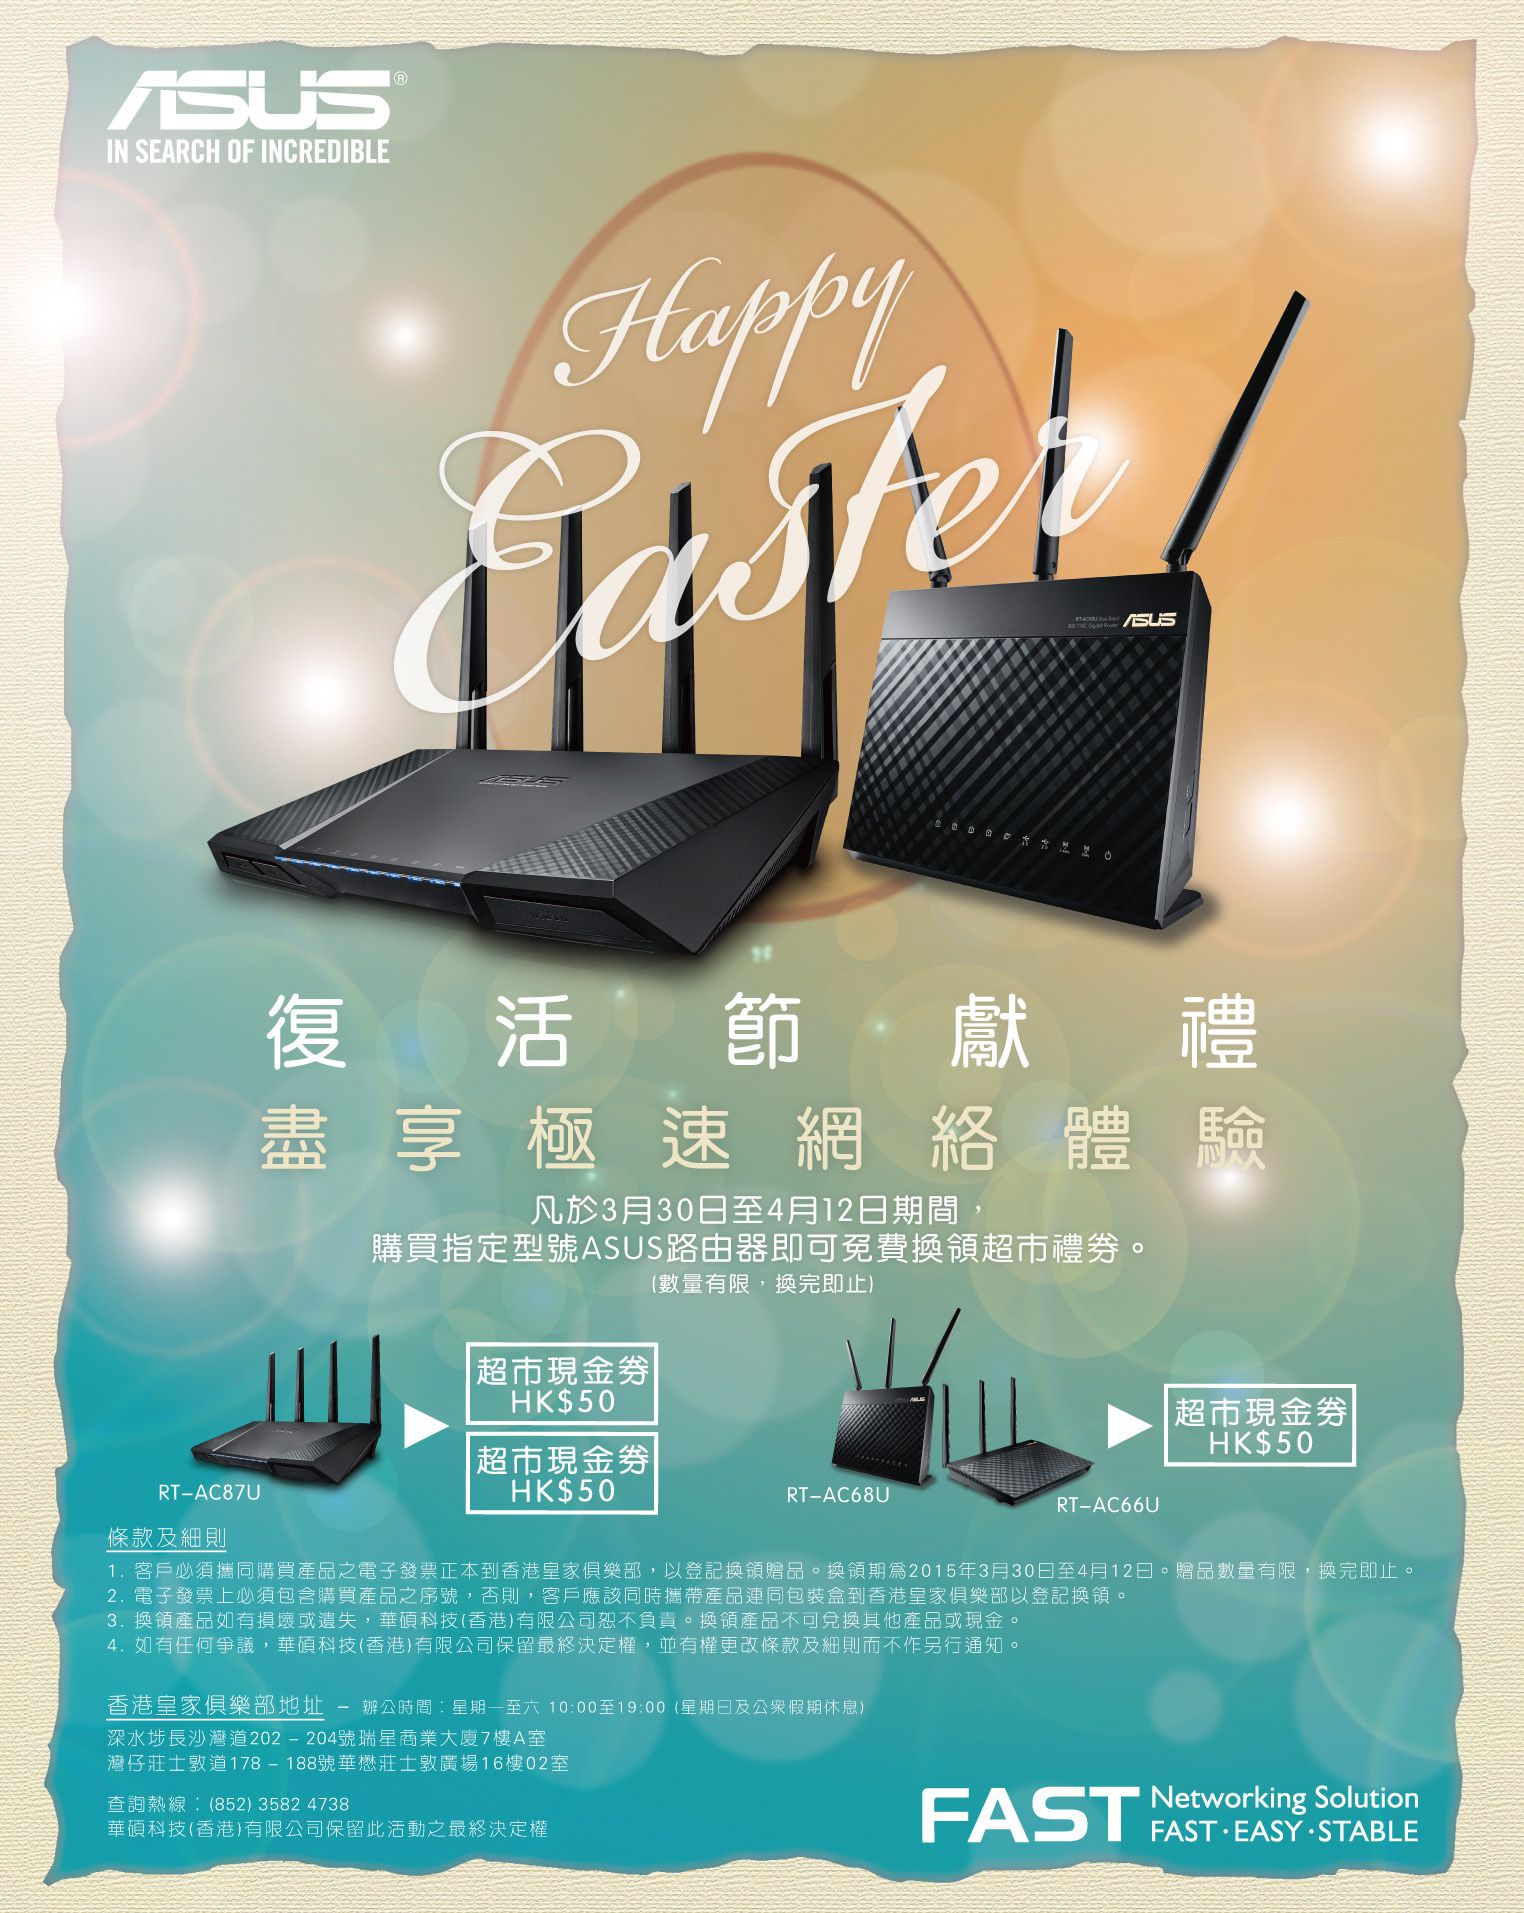 ASUS Easter Promotion